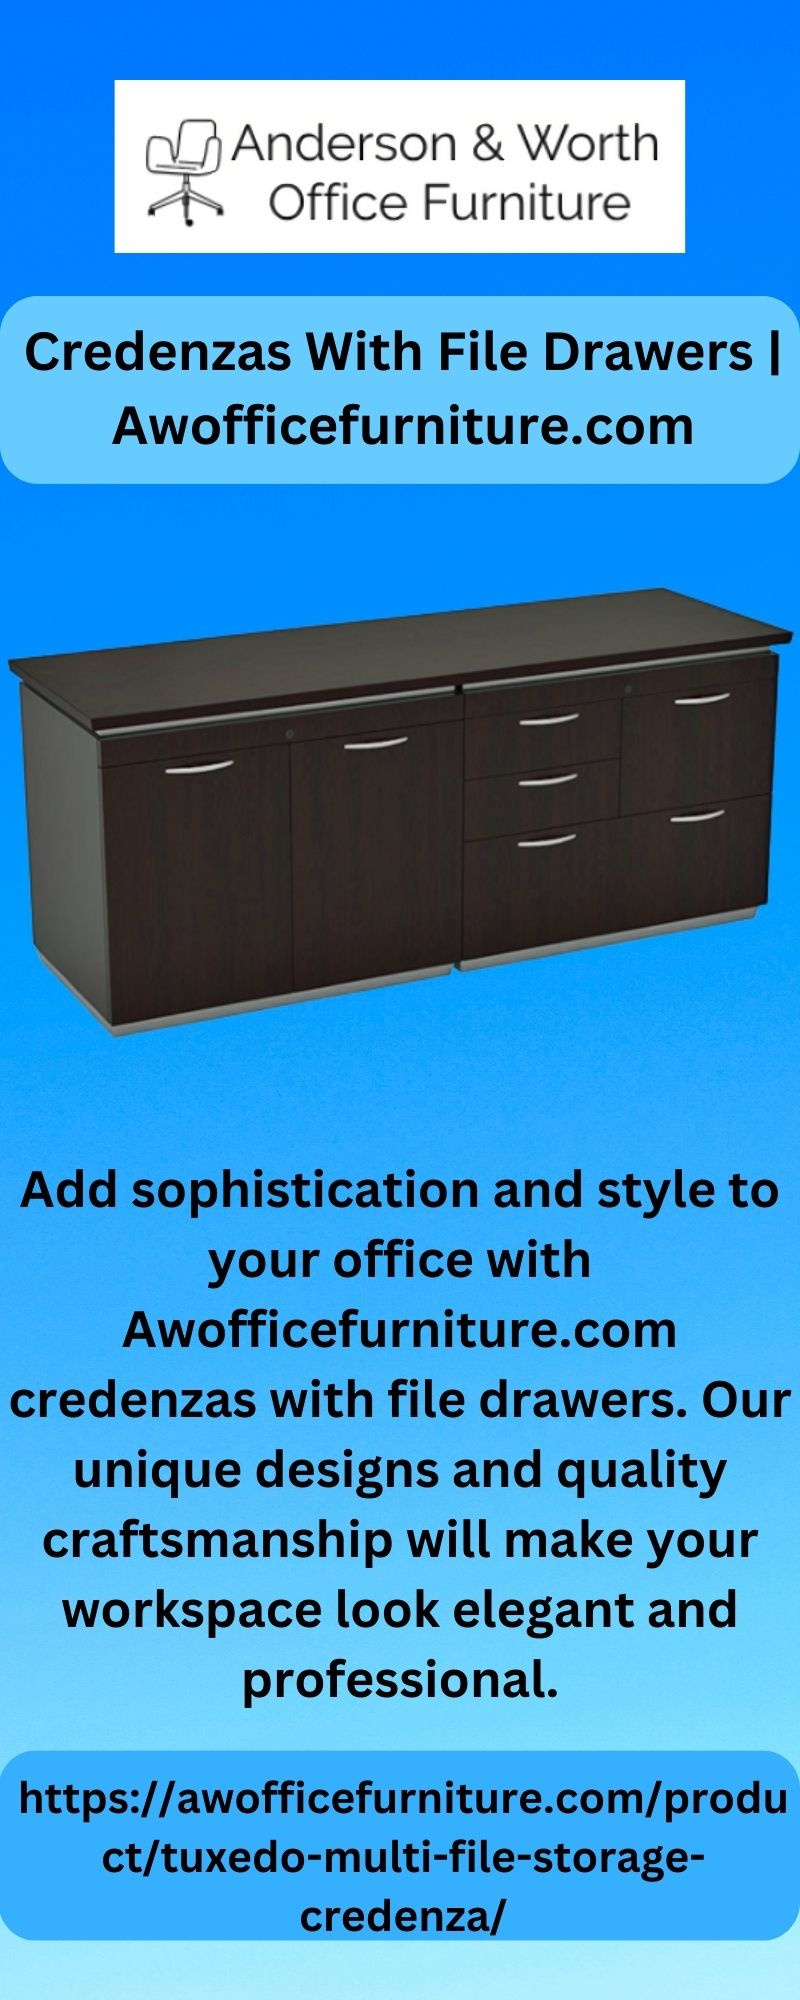 Credenzas With File Drawers | Awofficefurniture.com by Anderson & Worth ...